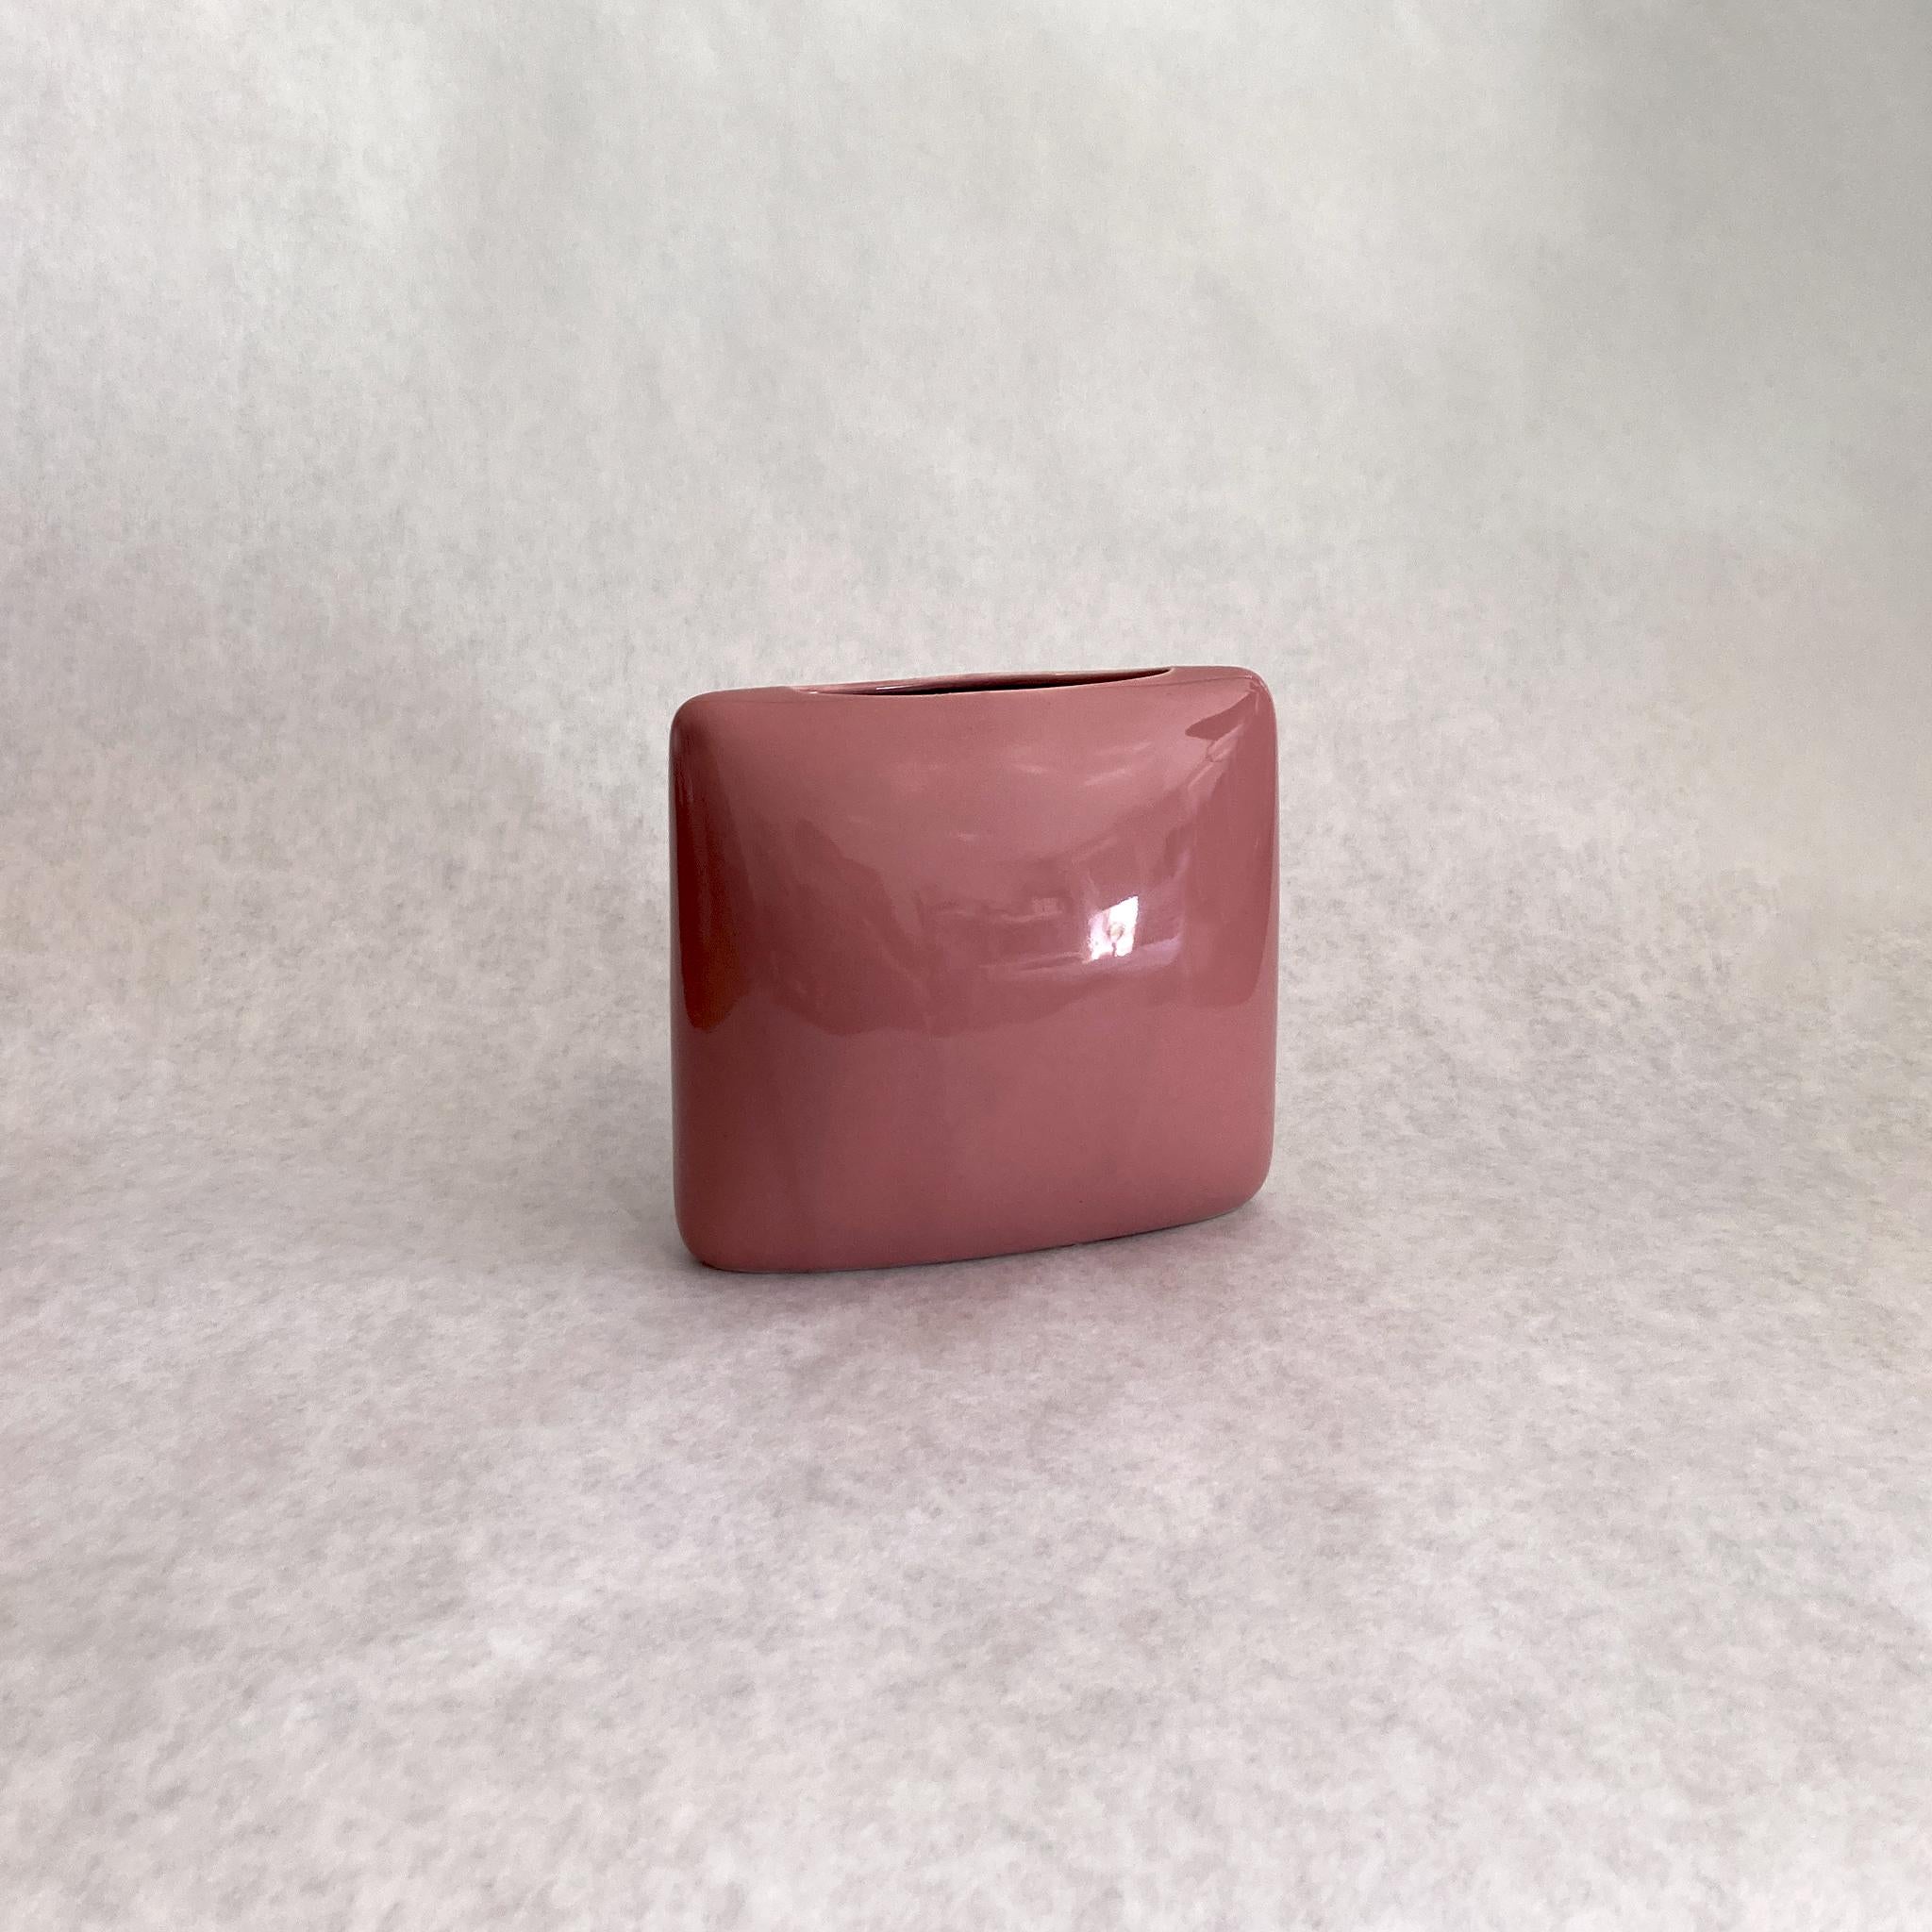 American Royal Haeger Mauve Pink Rounded Square Vase